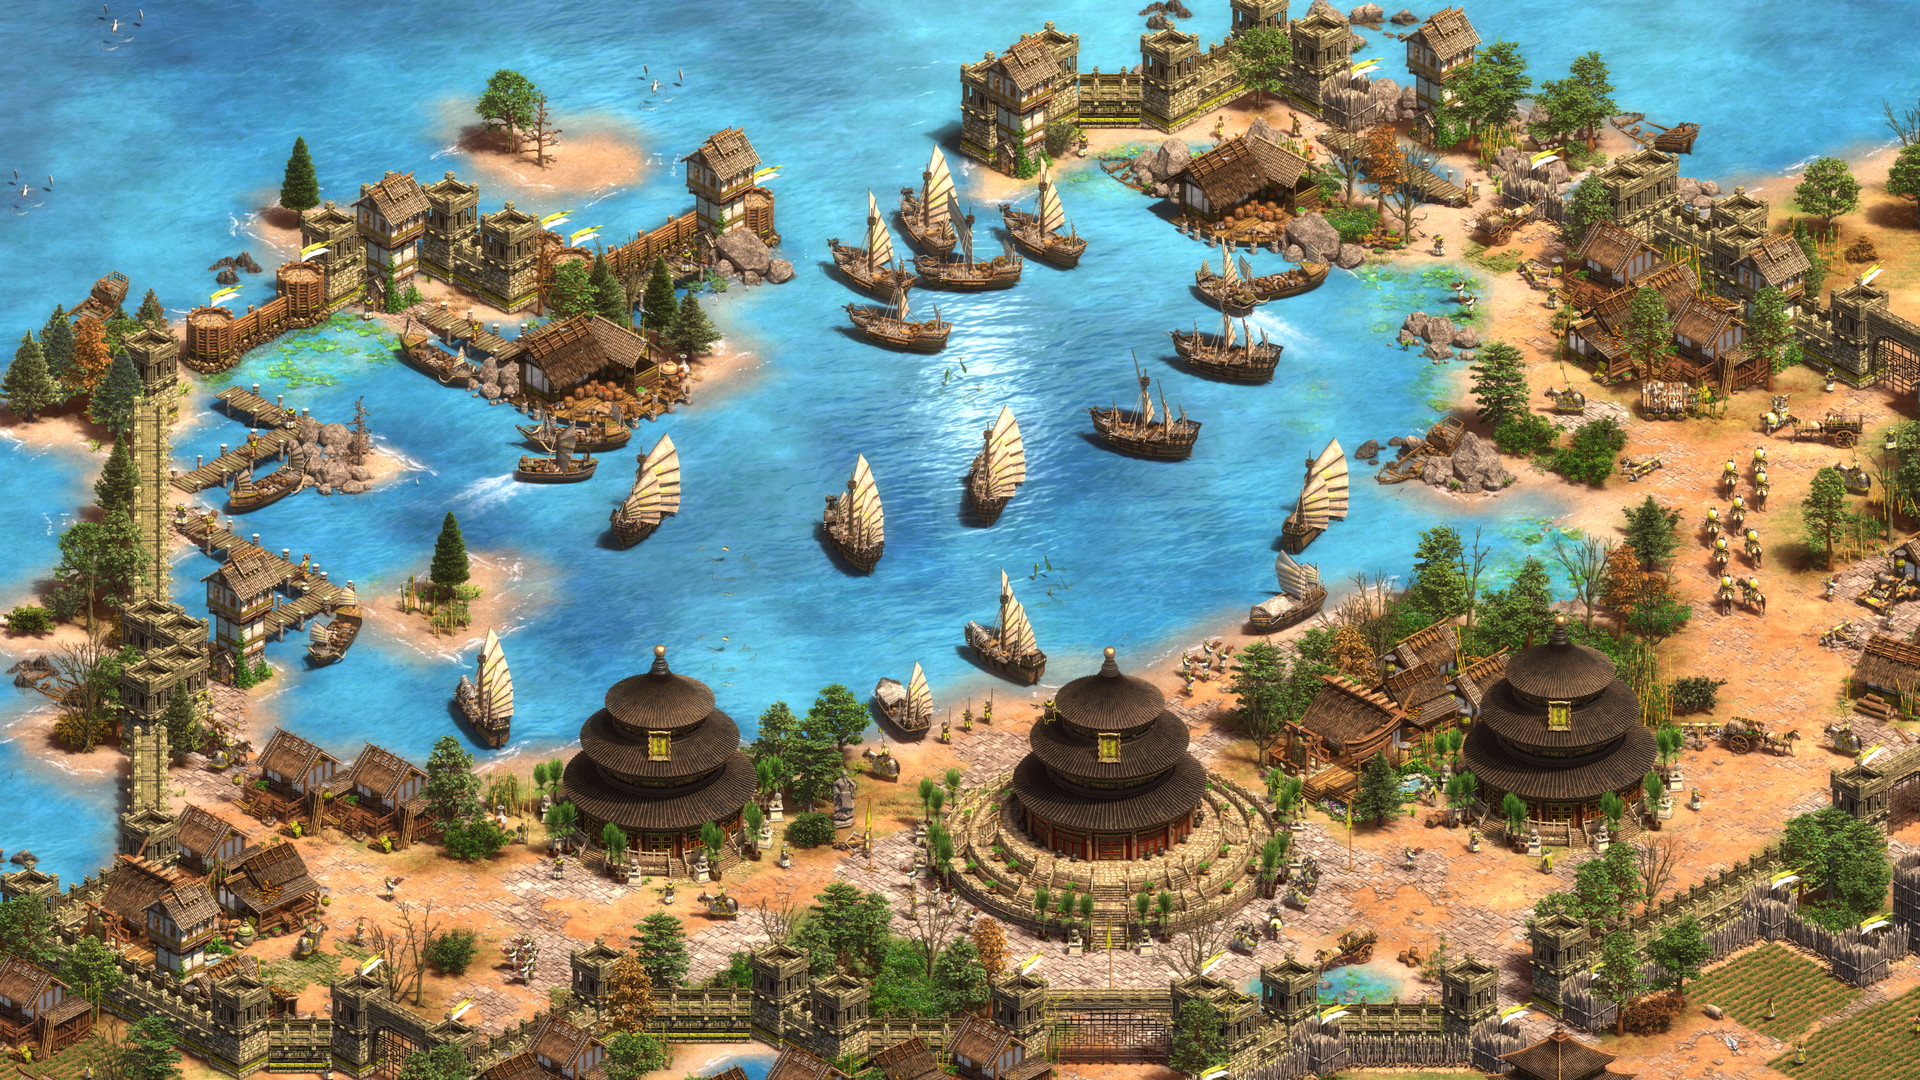 Age of Empires II: Definitive Edition - screenshot 10